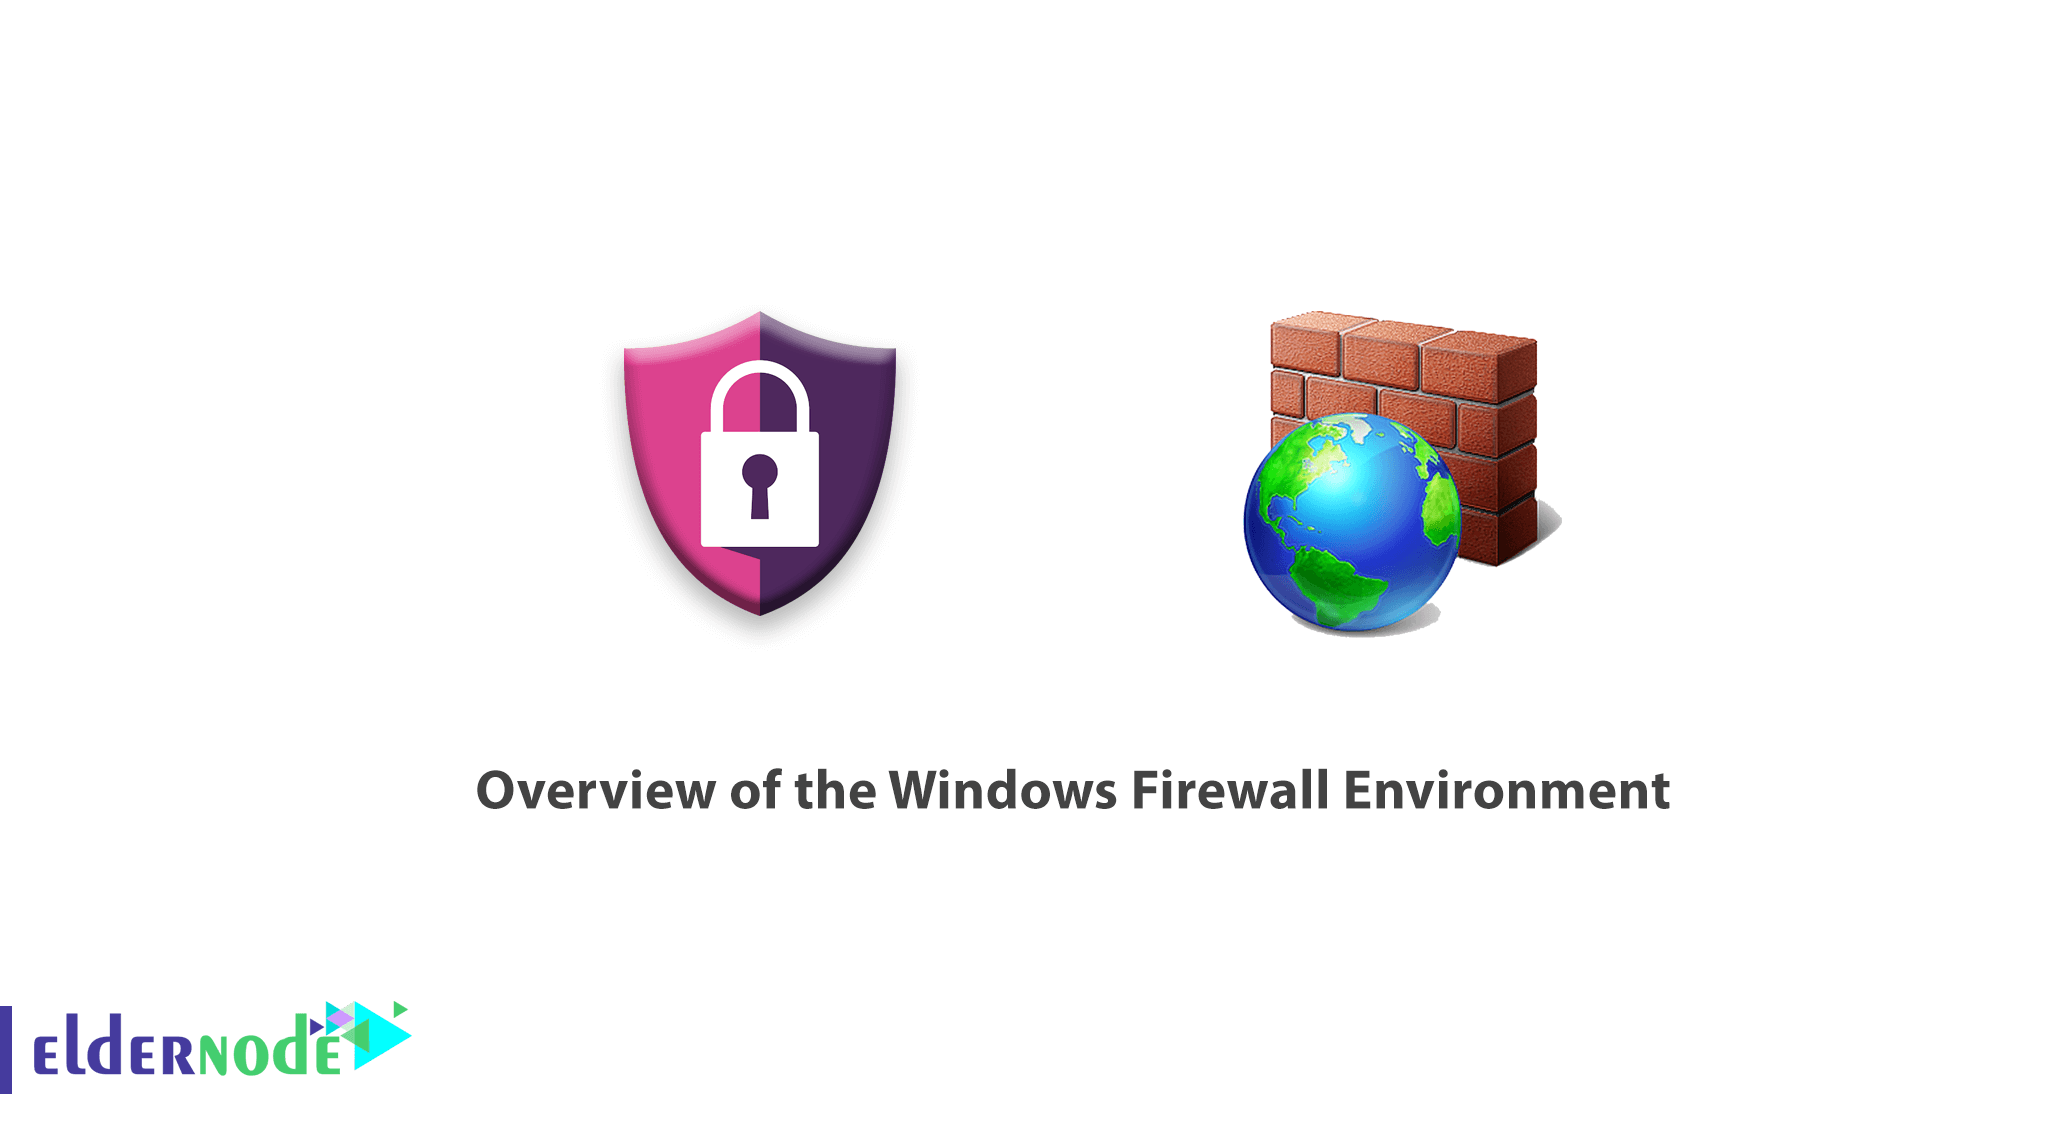 Overview of the Windows Firewall Environment